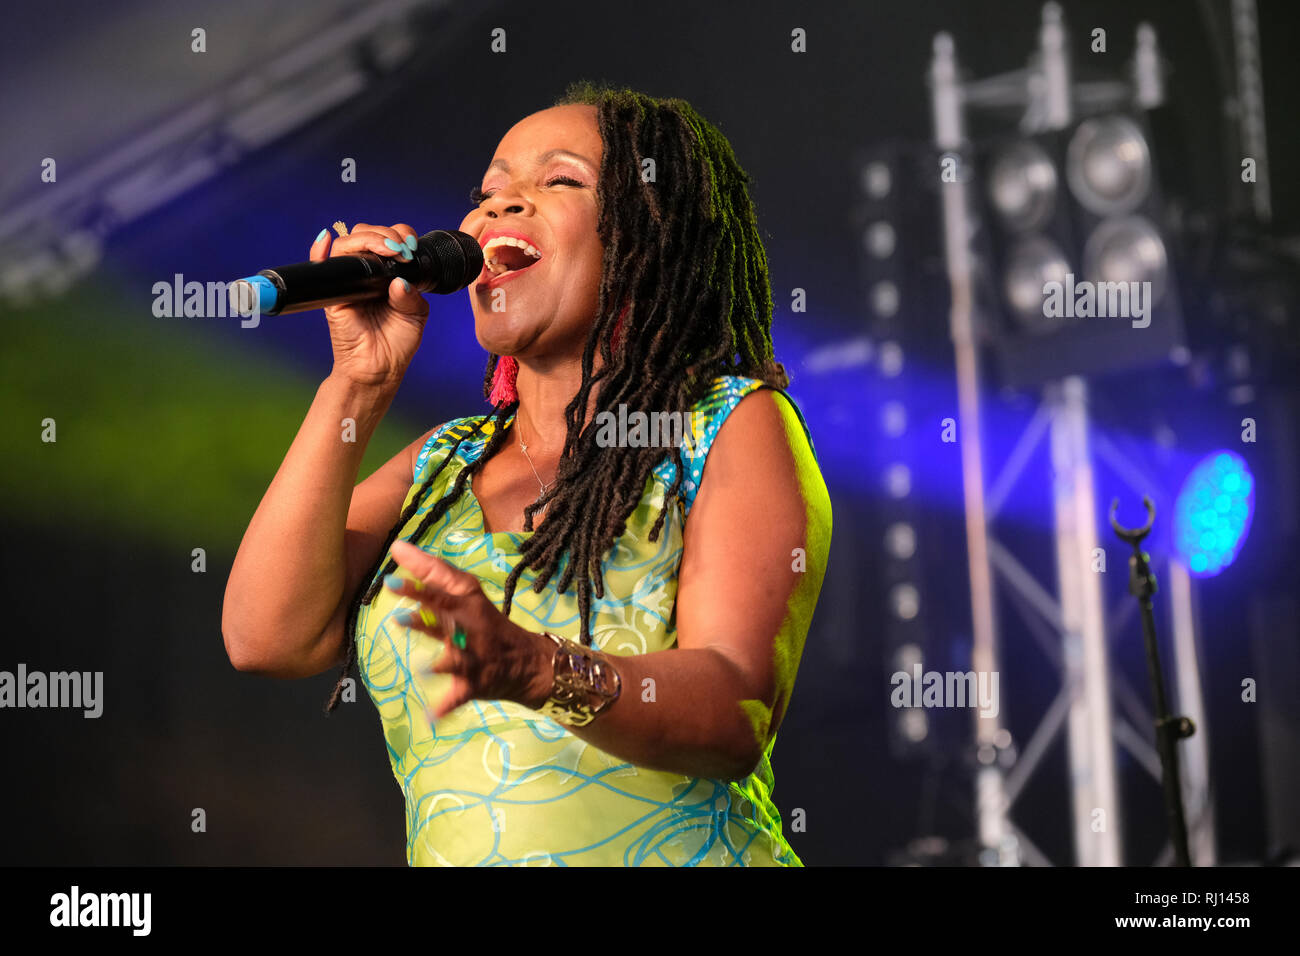 PP Arnold performing at the Cornbury Music Festival, Great Tew, Oxfordshire, UK. July 14, 2018 Stock Photo